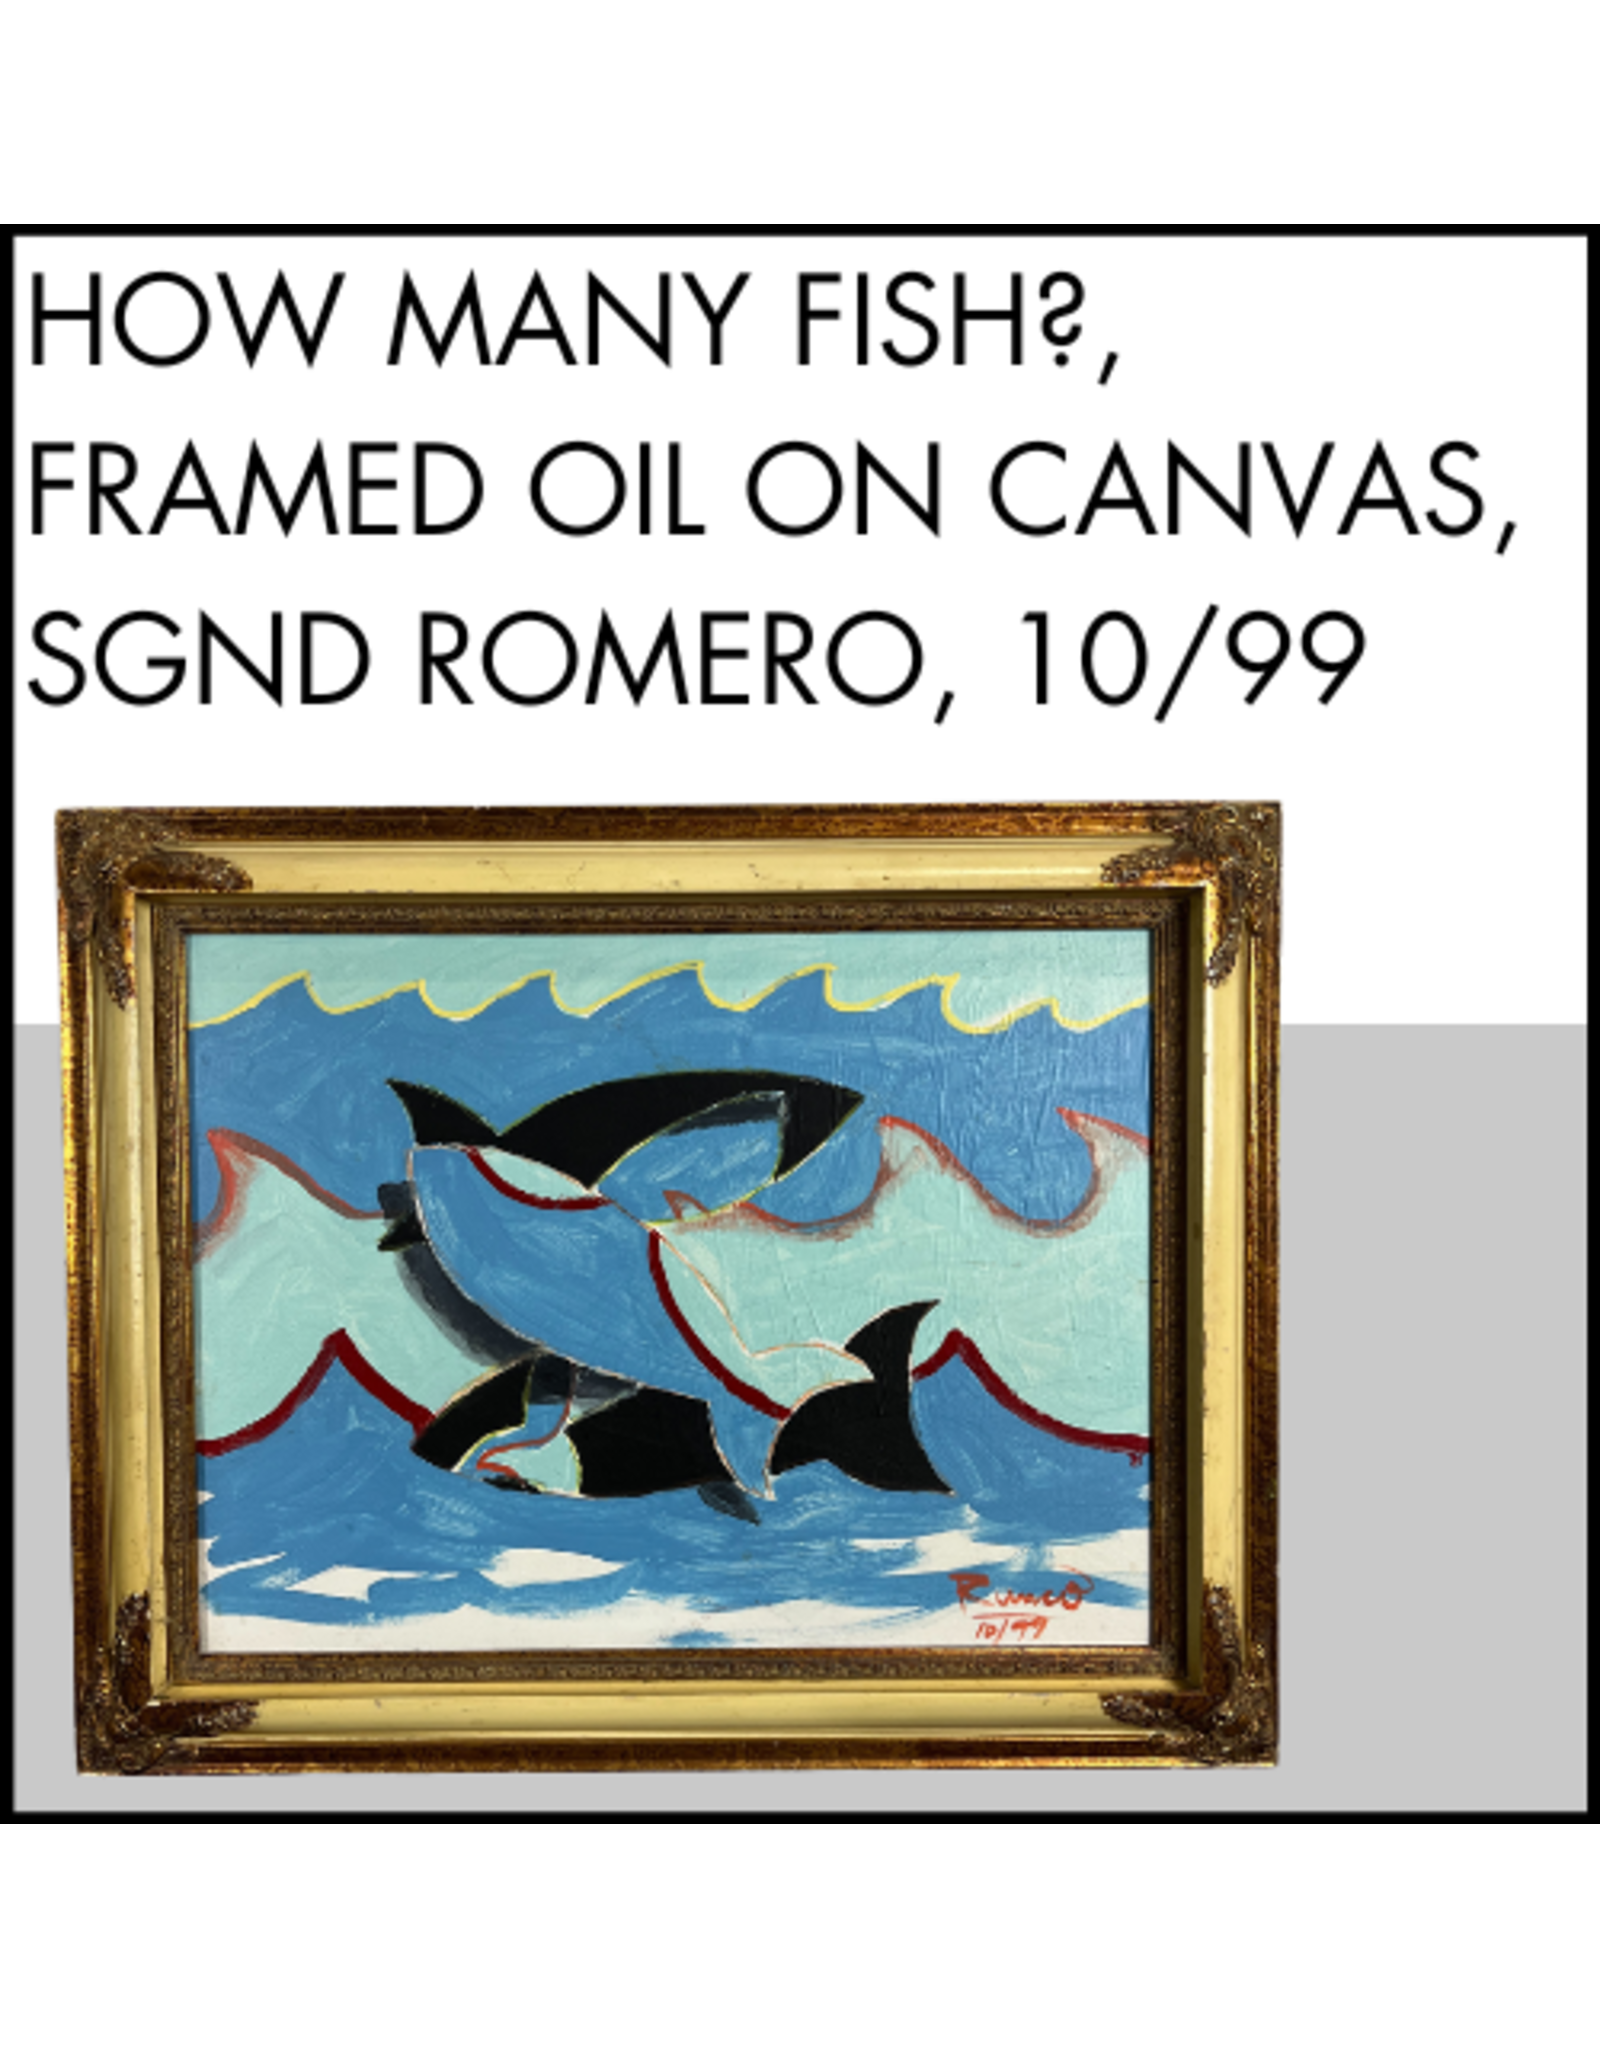 How Many Fish?, framed oil on canvas, sgnd Romero 10/99